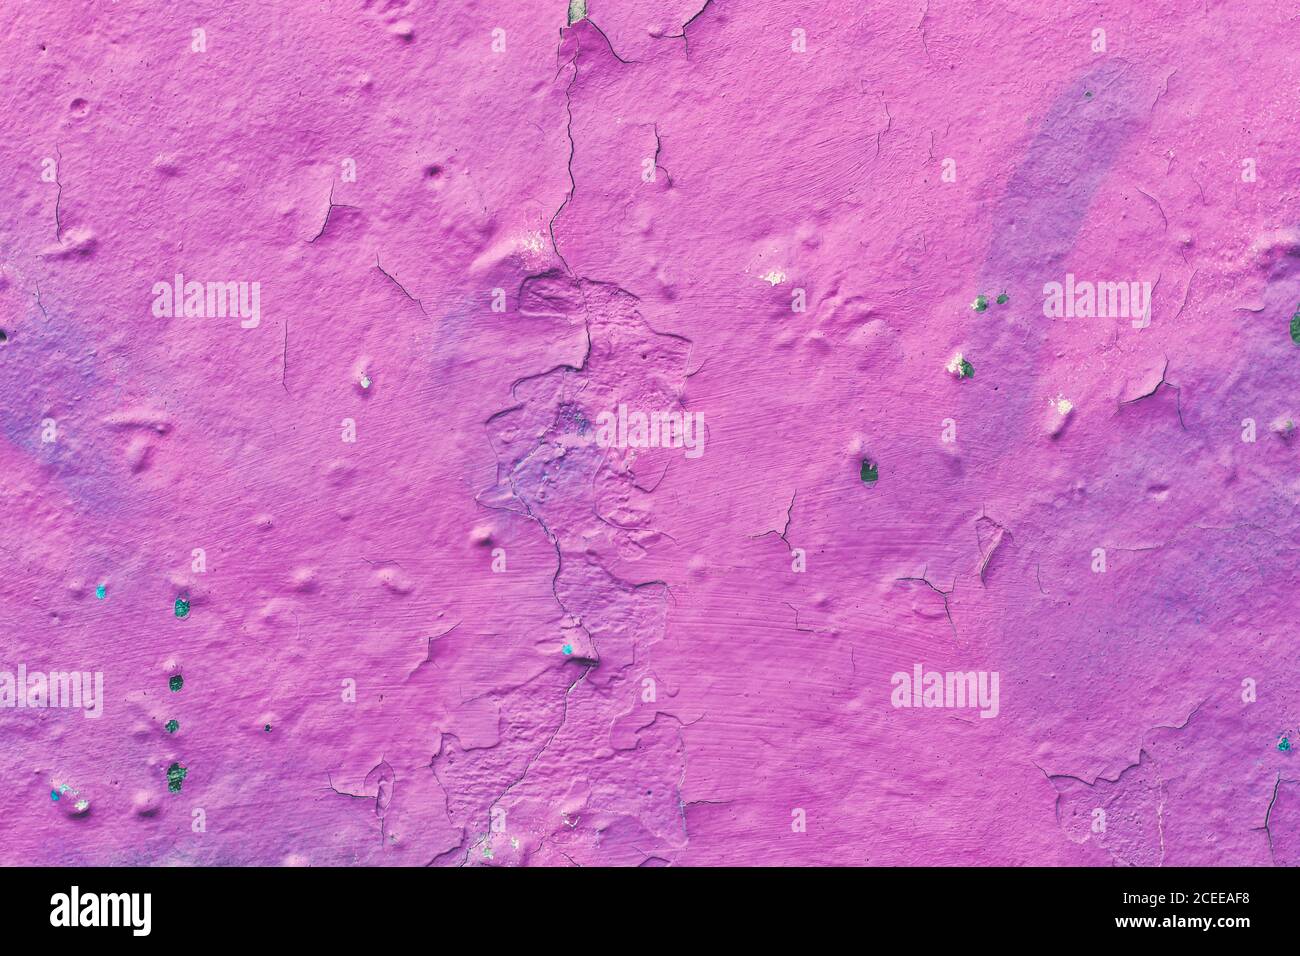 Cracked plaster, peeling pink paint on a concrete wall, scratched stucco texture, decorative design wallpaper, abstract background, natural pattern, g Stock Photo